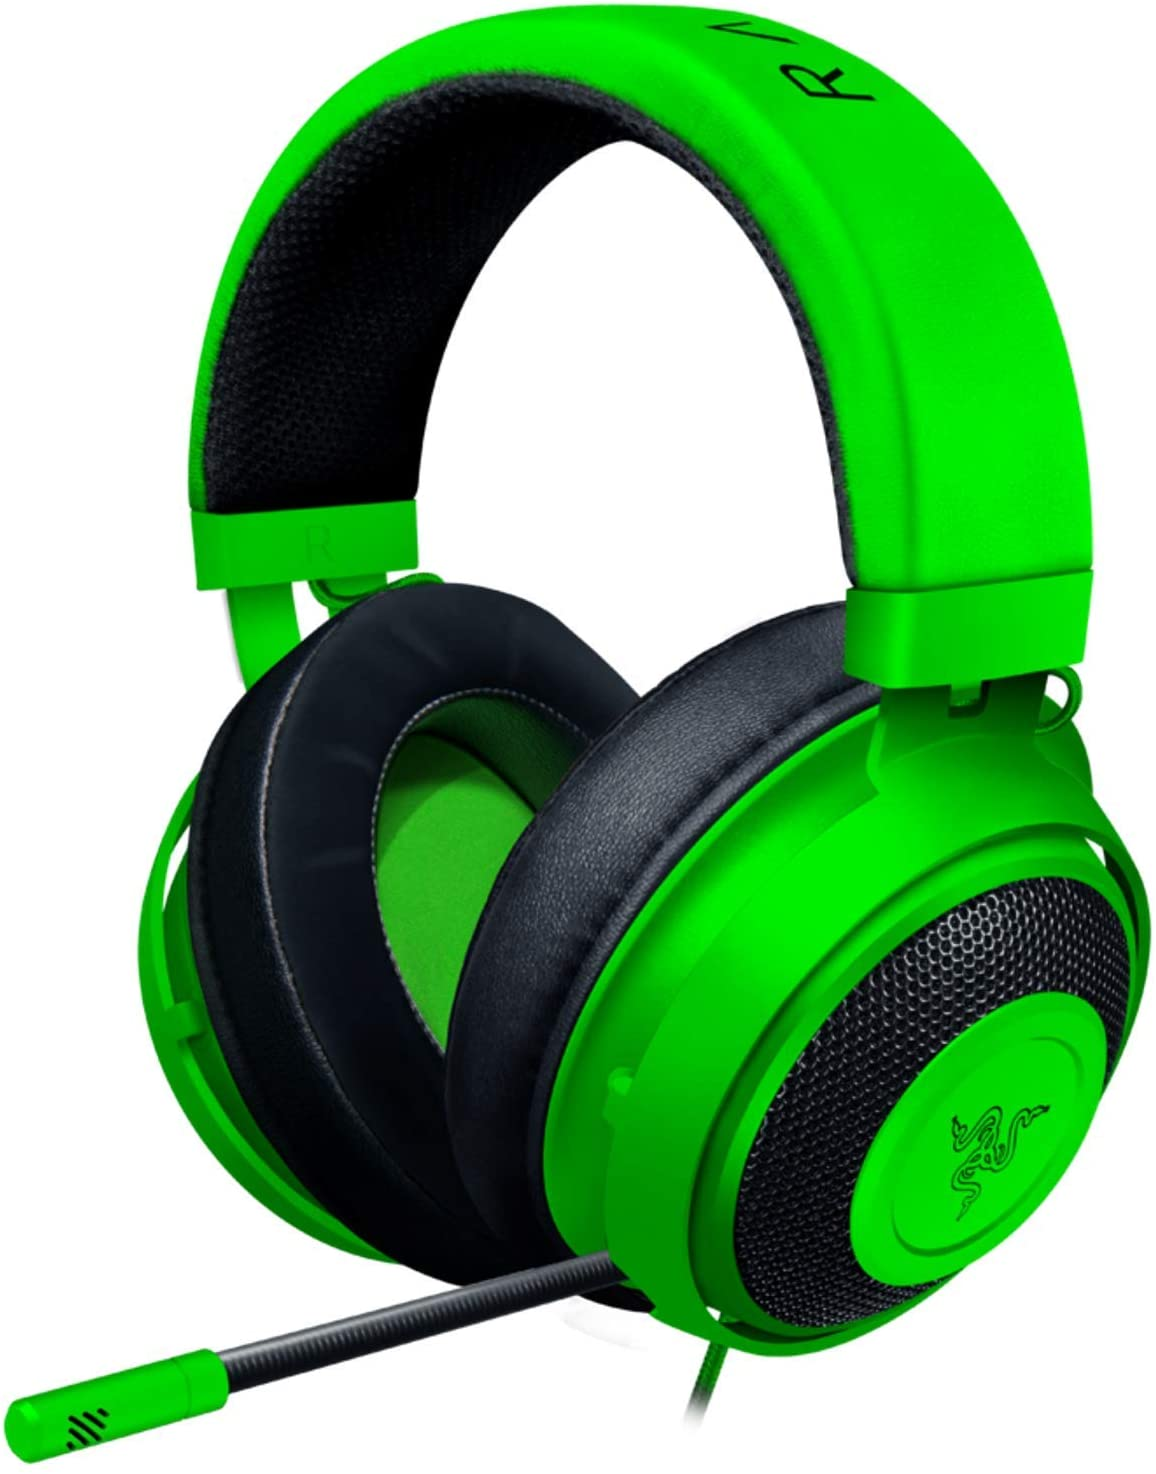 Amazon.com: Razer Kraken Gaming Headset: Lightweight Aluminum Frame - for PC, PS4, PS5, Switch, Xbox One, Xbox Series X & S, Mobile - 3.5 m $40